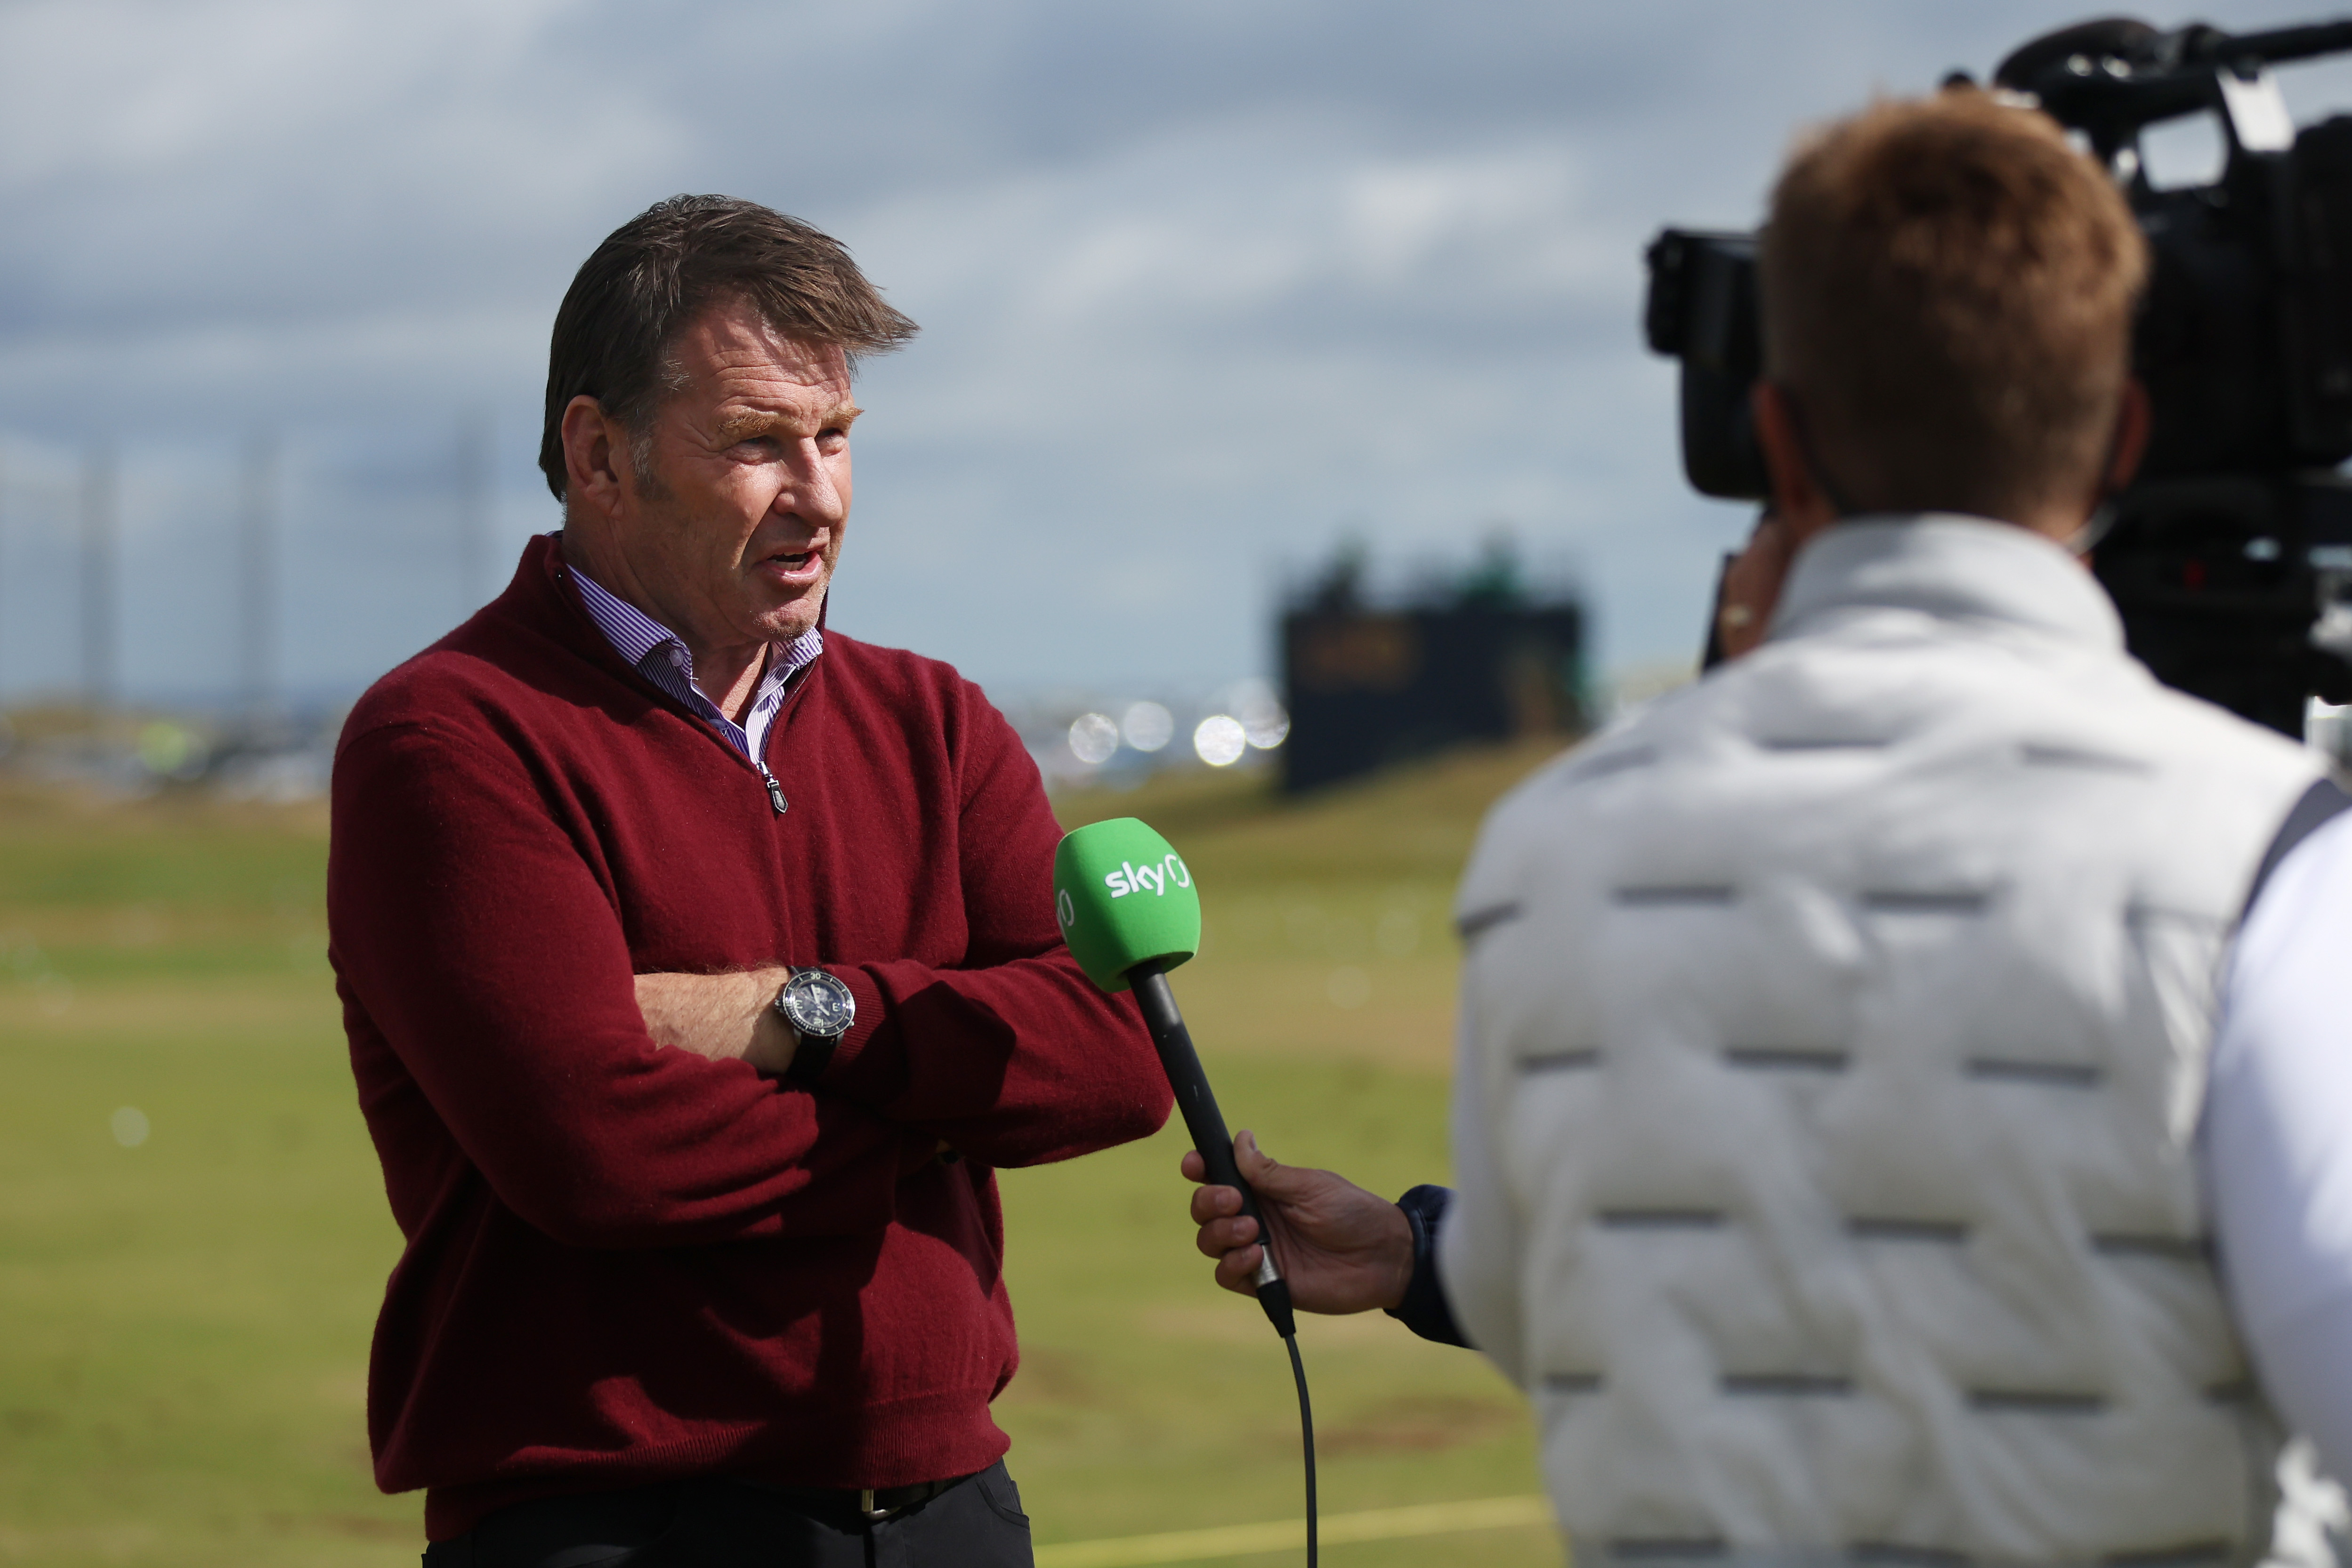 Nick Faldo rips Greg Norman, says LIV golfers are done playing in the Ryder Cup Golf News and Tour Information GolfDigest